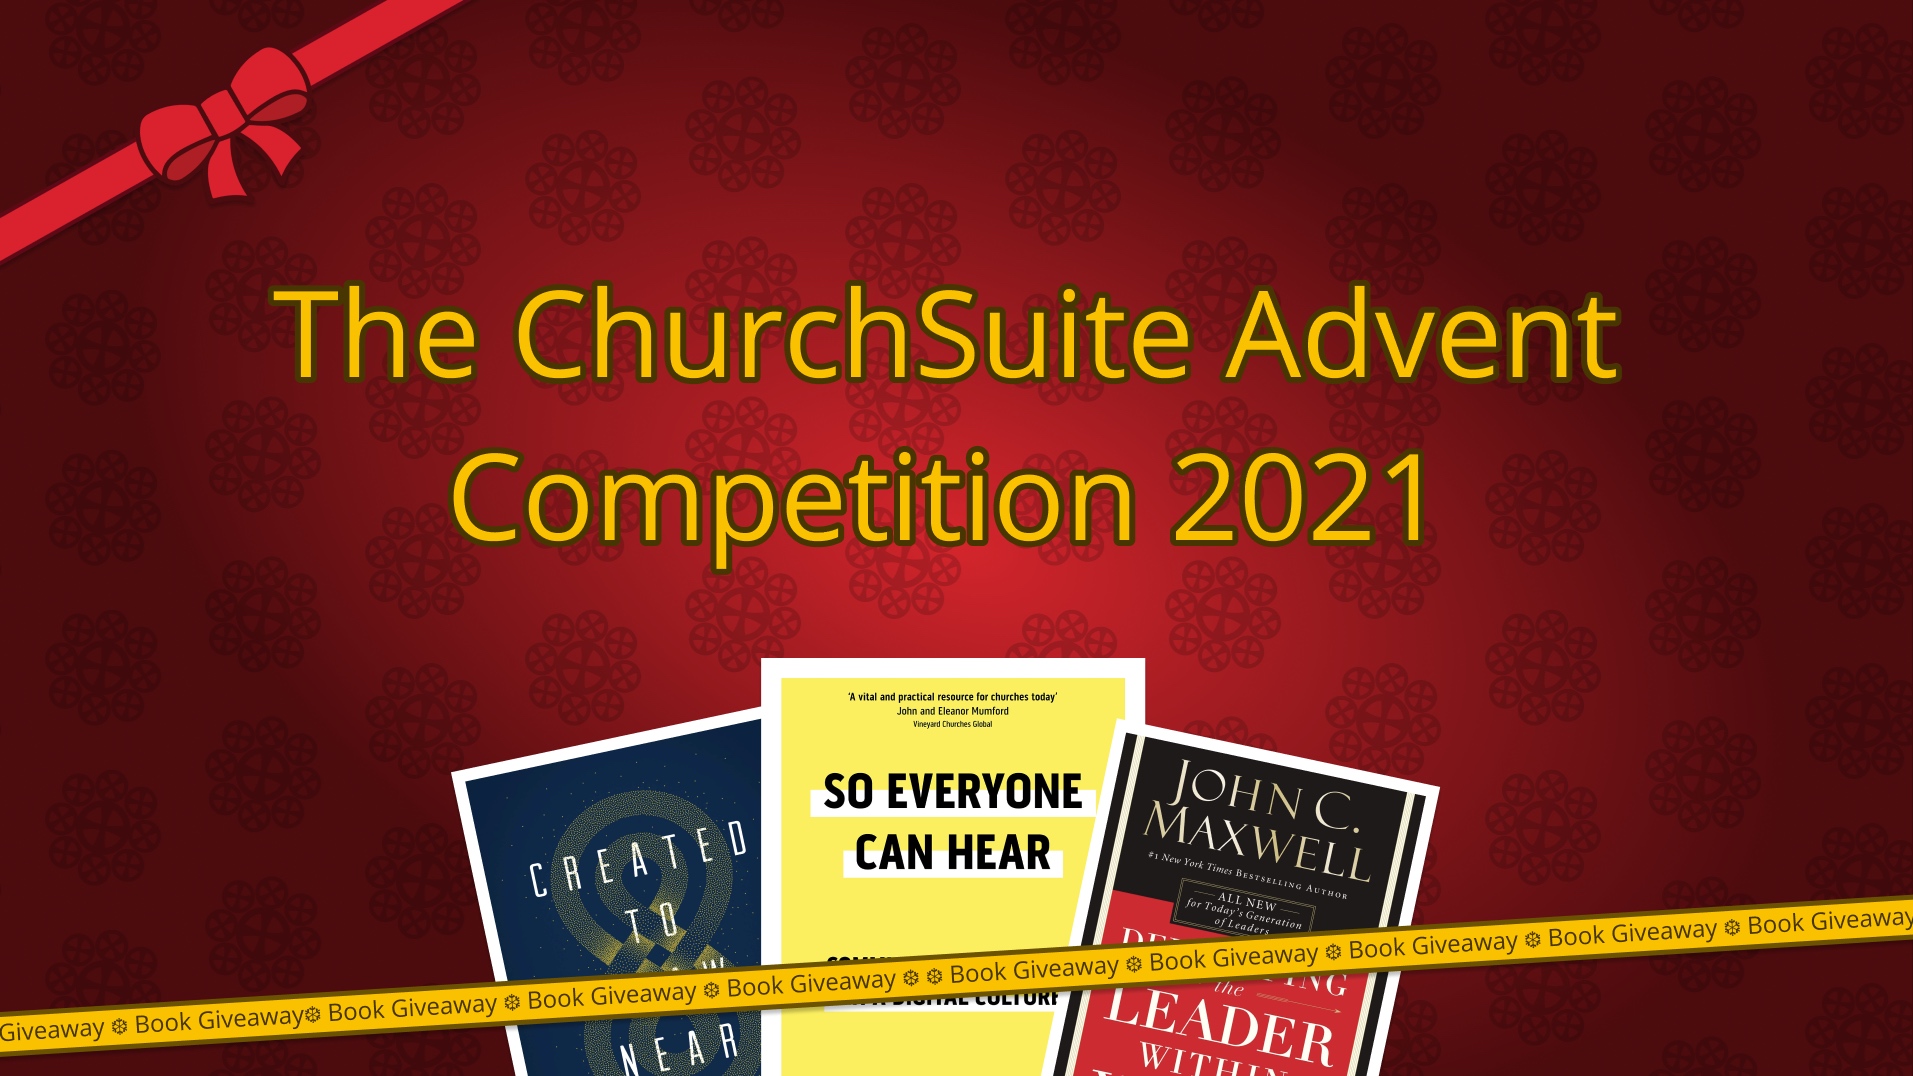 The ChurchSuite Advent Competition 2021